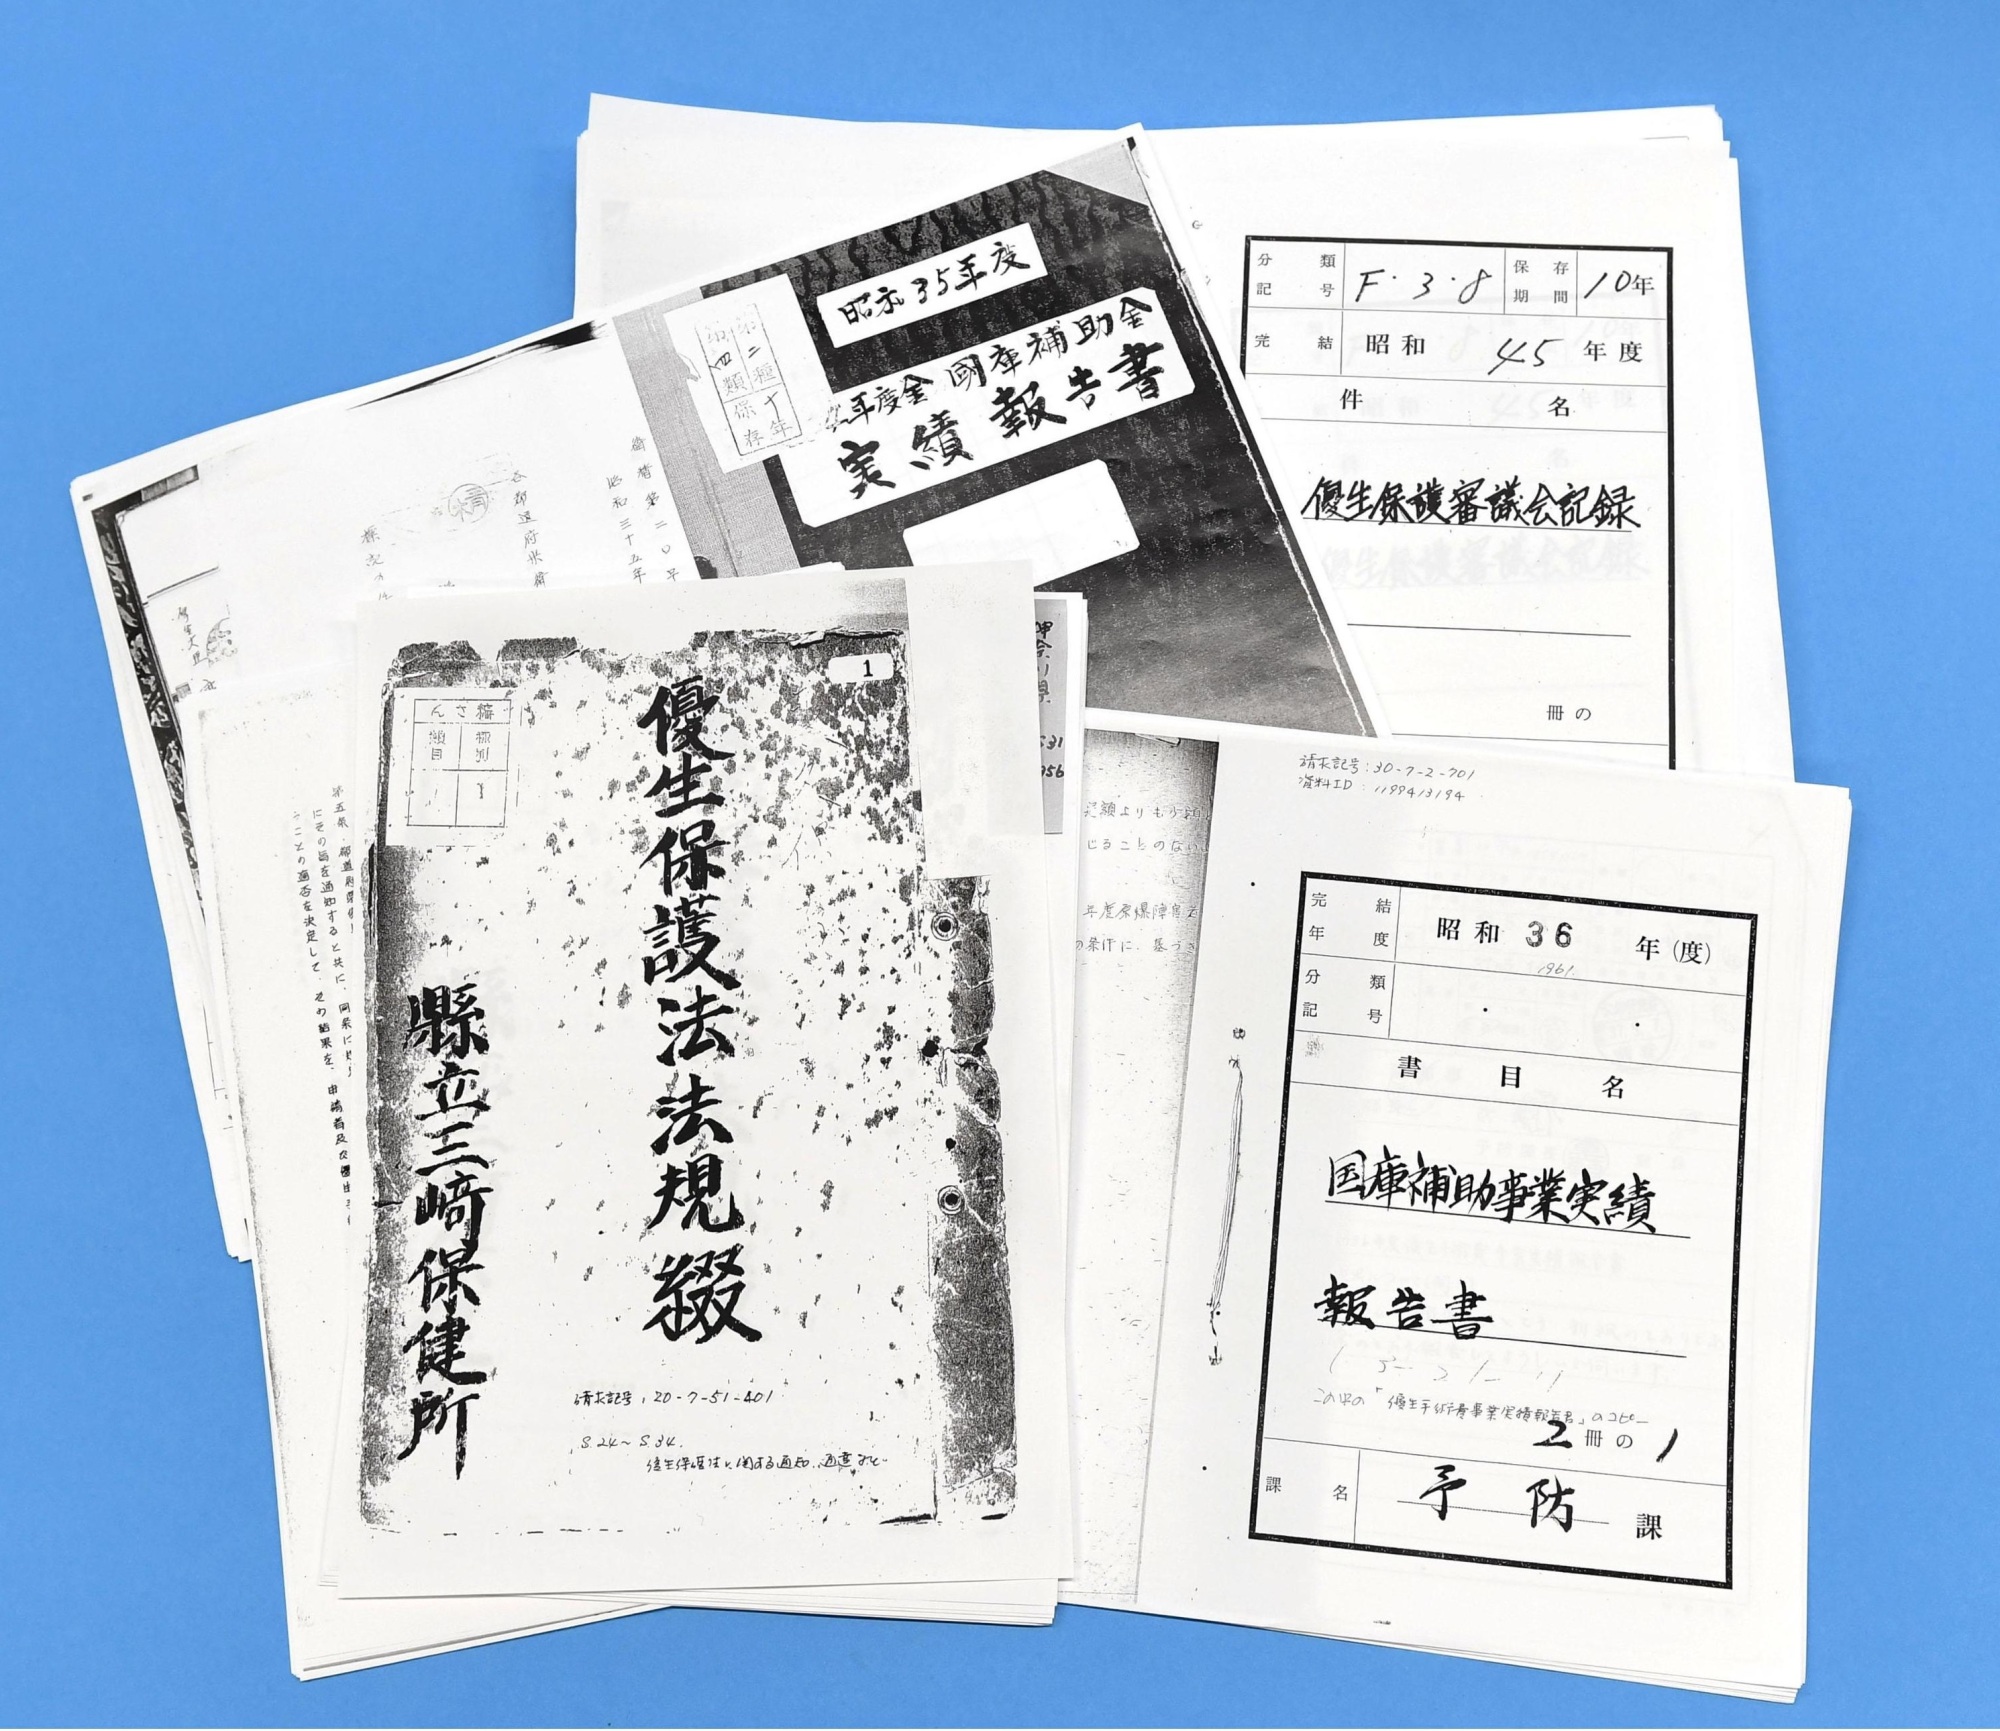 These documents related to the Eugenic Protection Law, which existed until 1996, were found in the Kanagawa Prefectural Government's archives. | KYODO